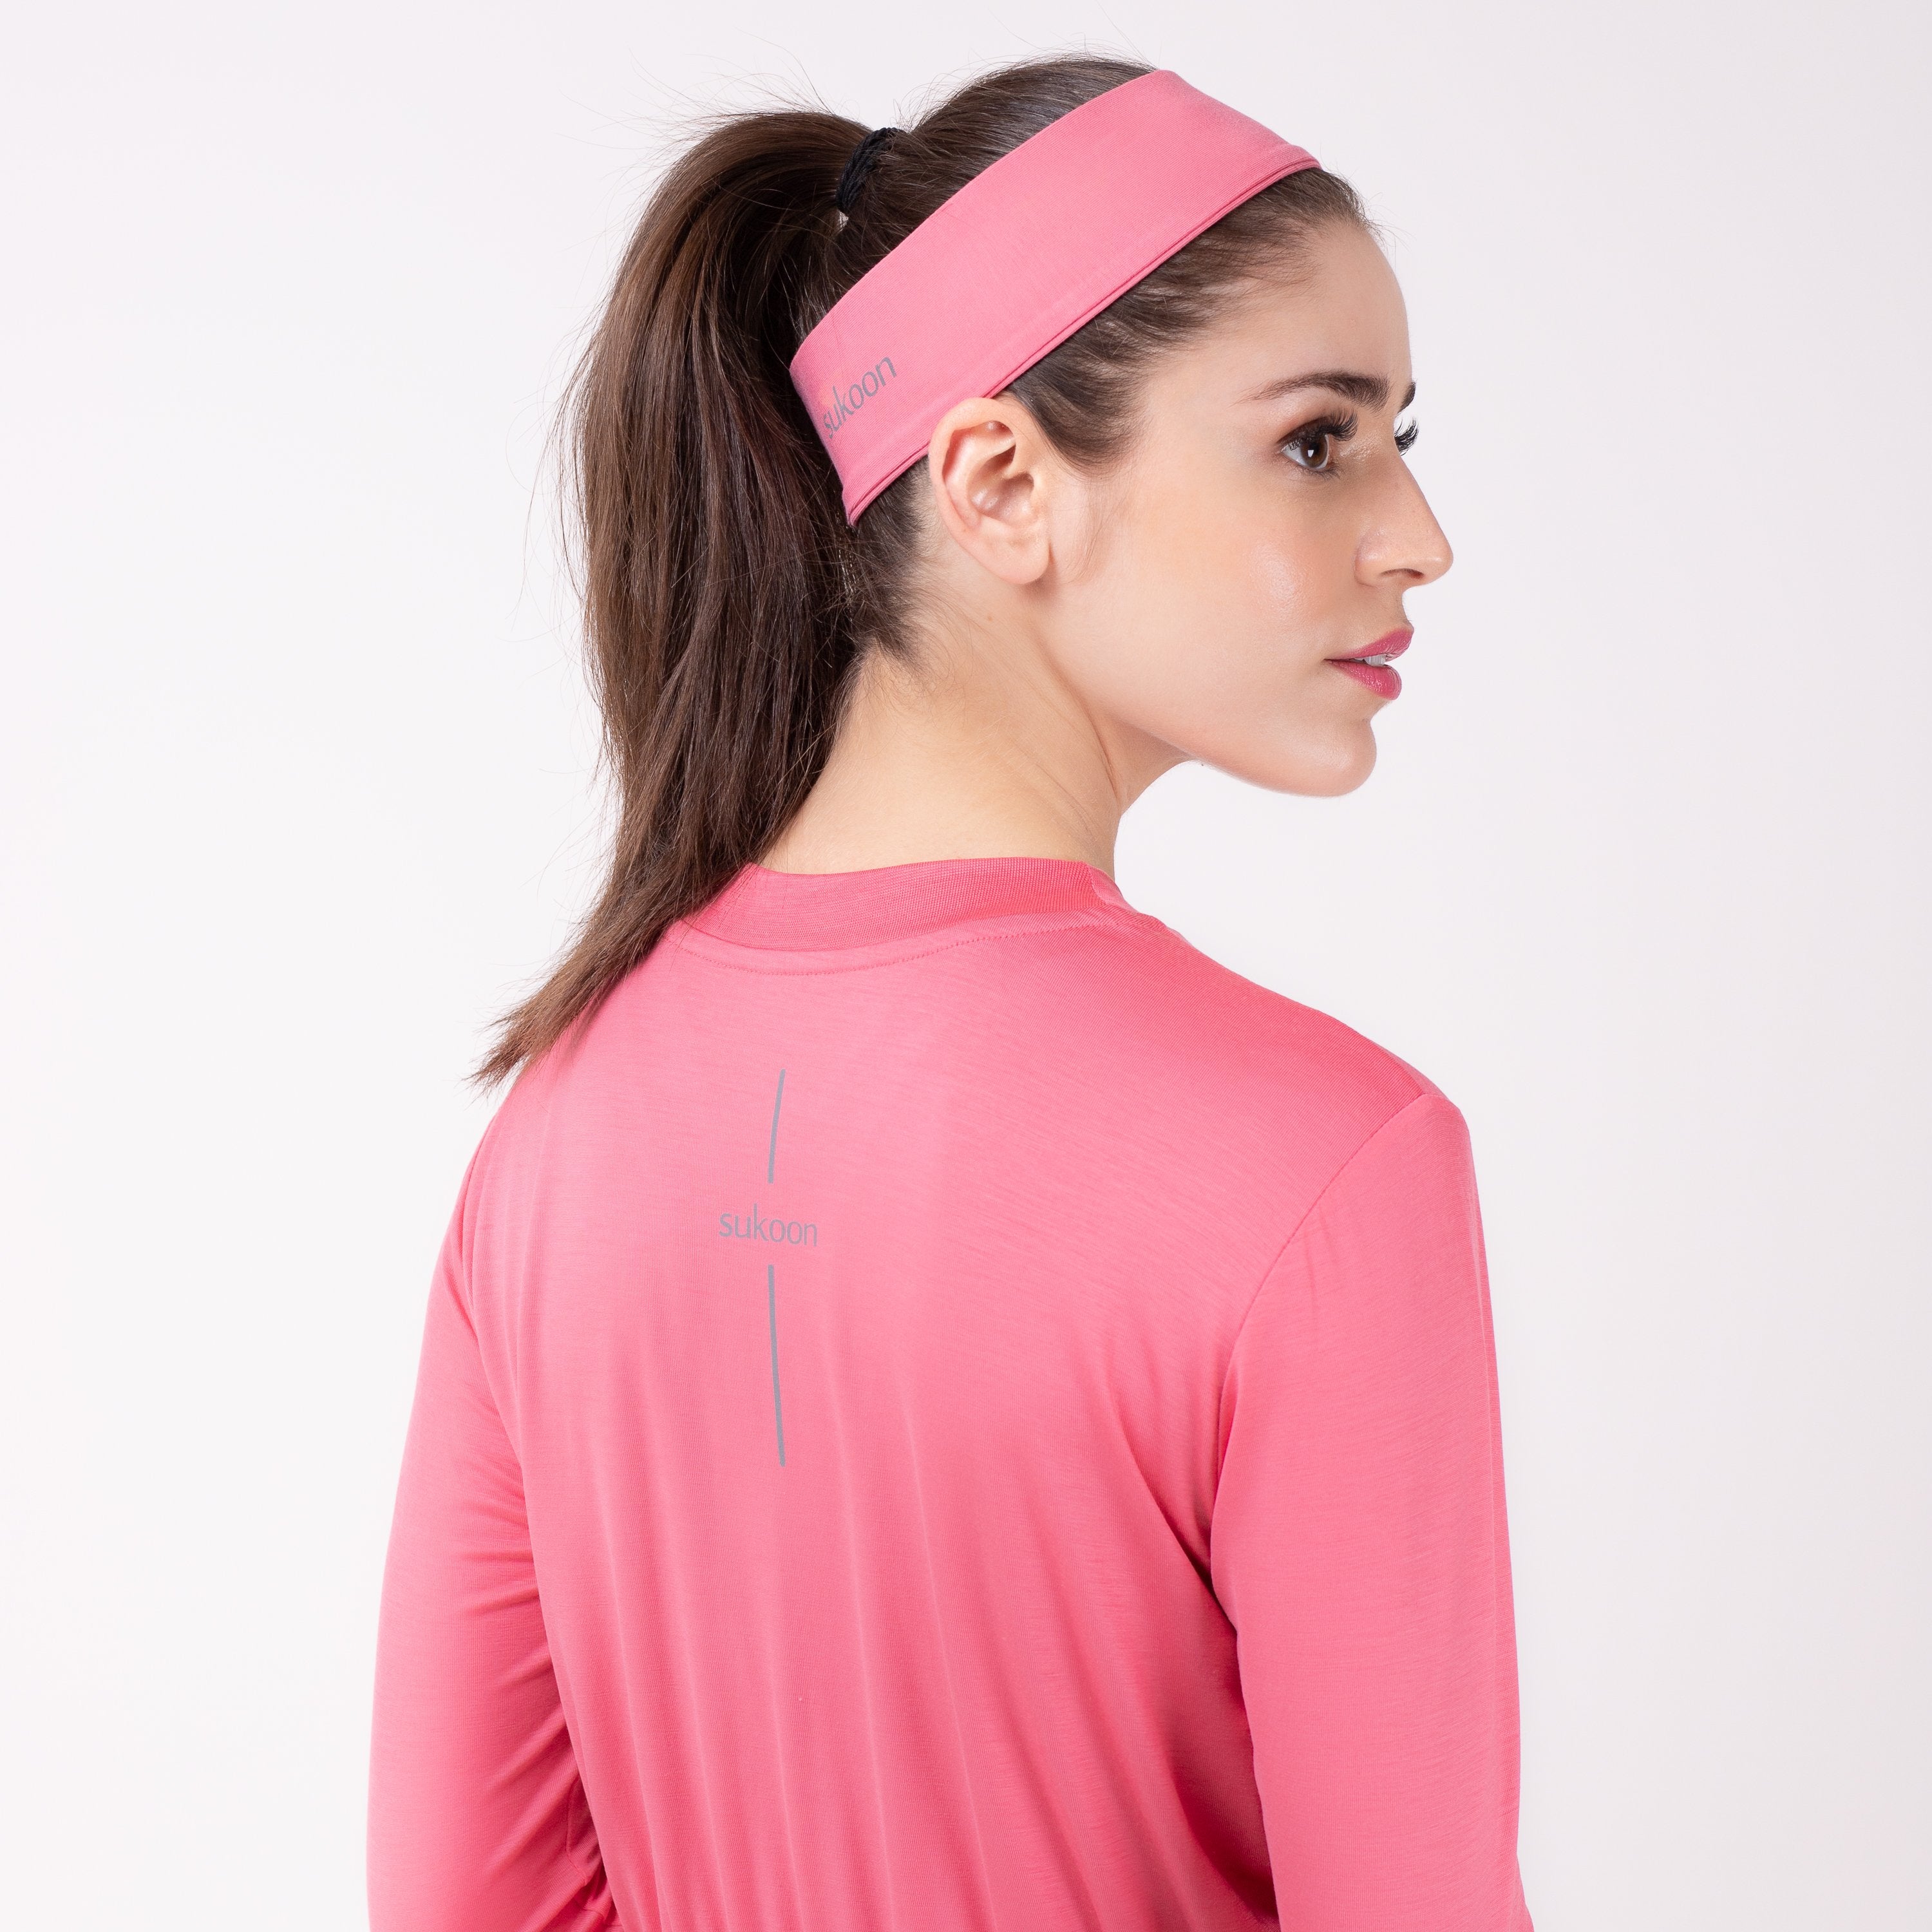 Back detail of woman in pink shirt with matching pink HAWA headband.